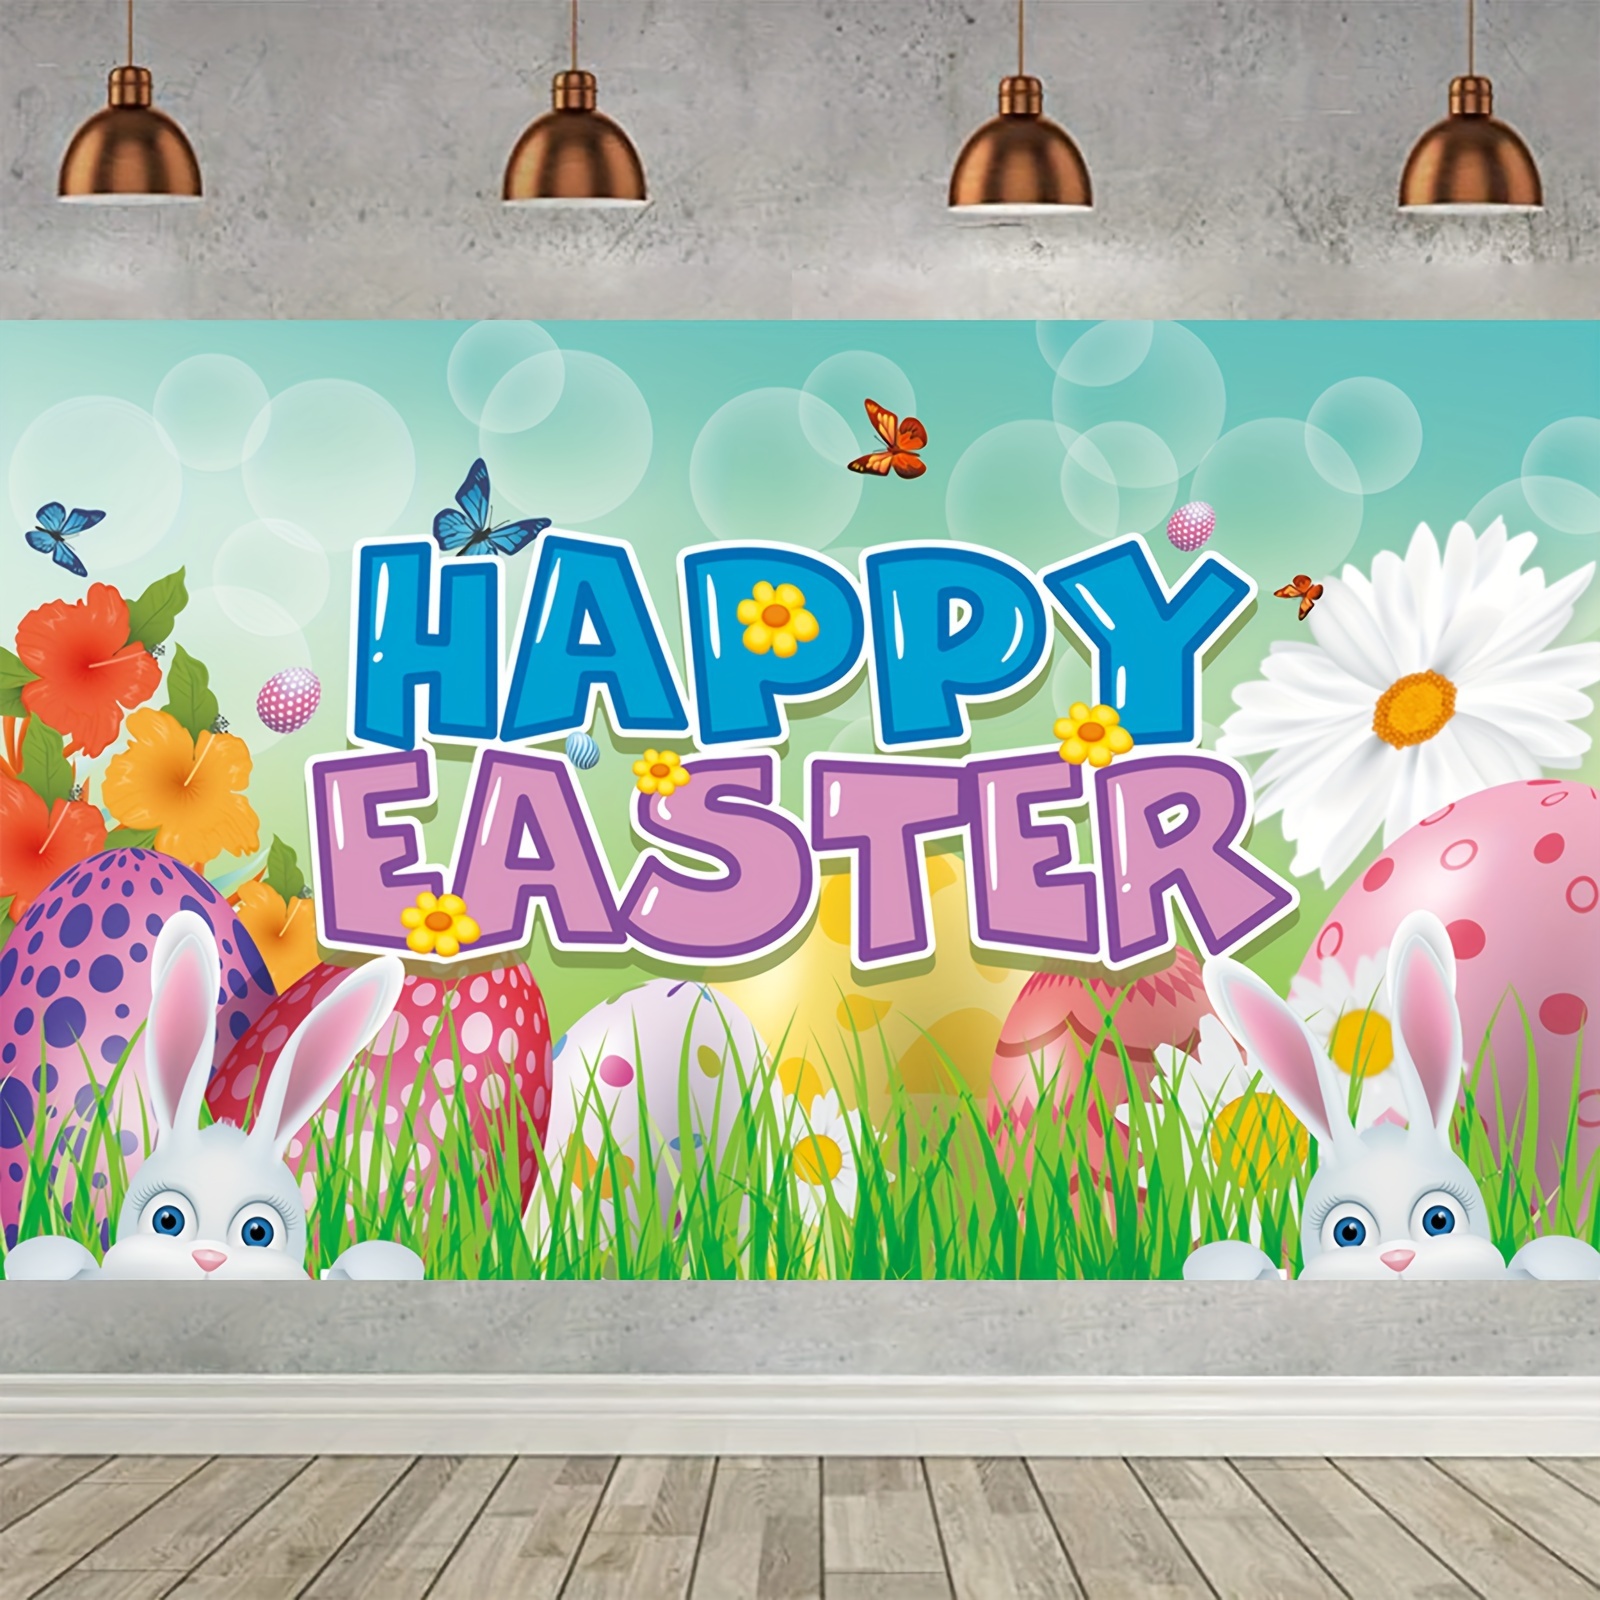 1pc 5 3ft spring easter garden photography backdrop rabbit bunny colorful eggs grass butterfly background party decoration kids children props photo booth party decor hanging home decor wall decor atmosphere decor holiday decor